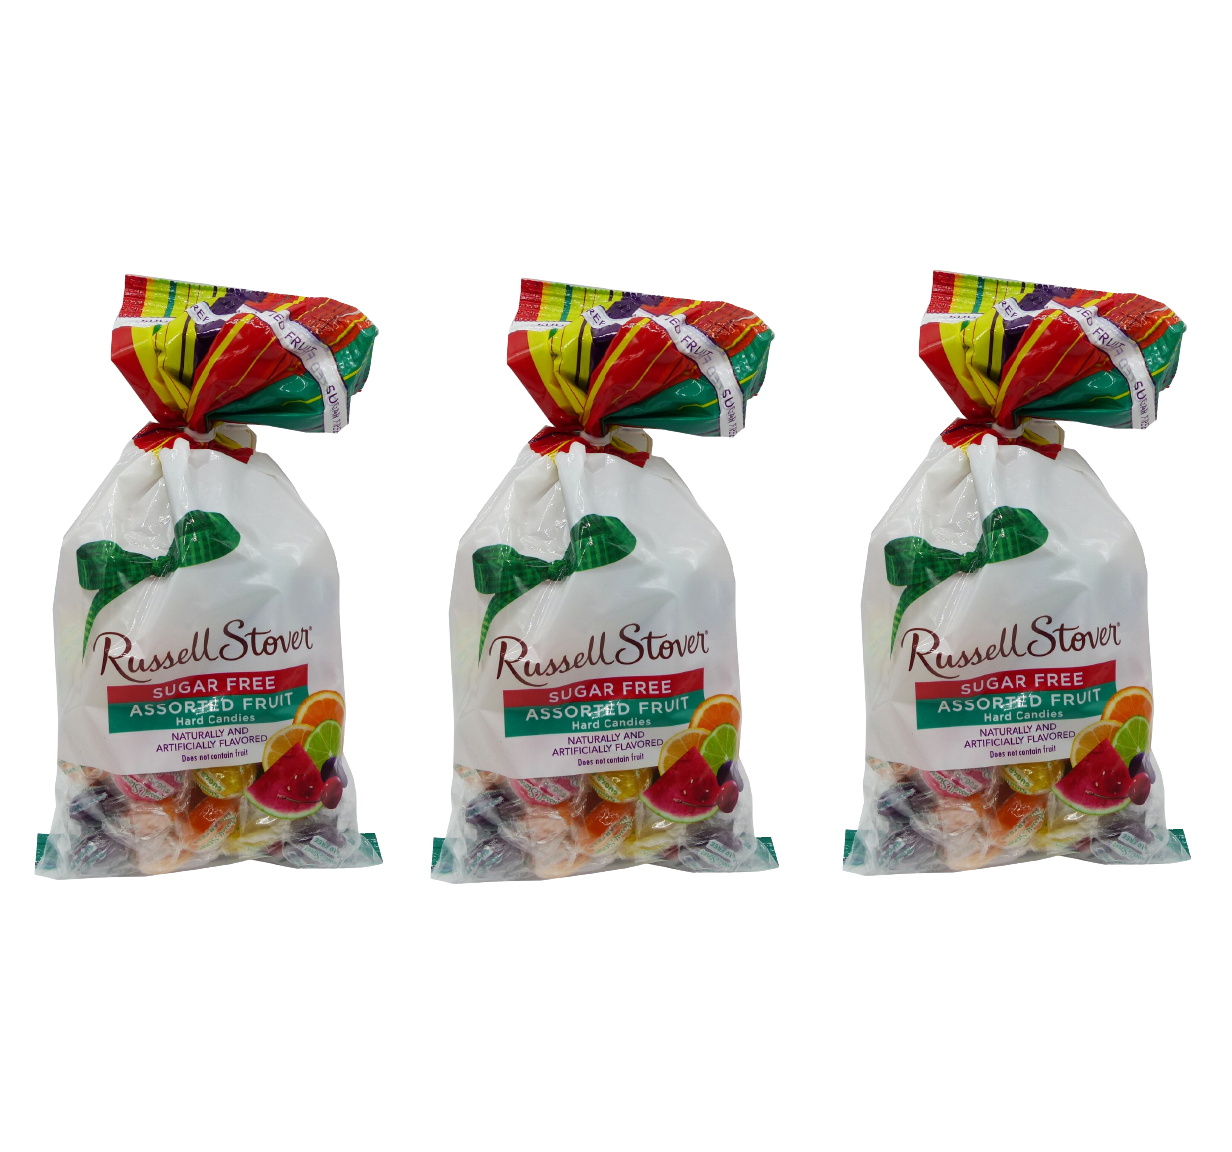 #Flavor_Assorted Fruit #Size_3 Bags